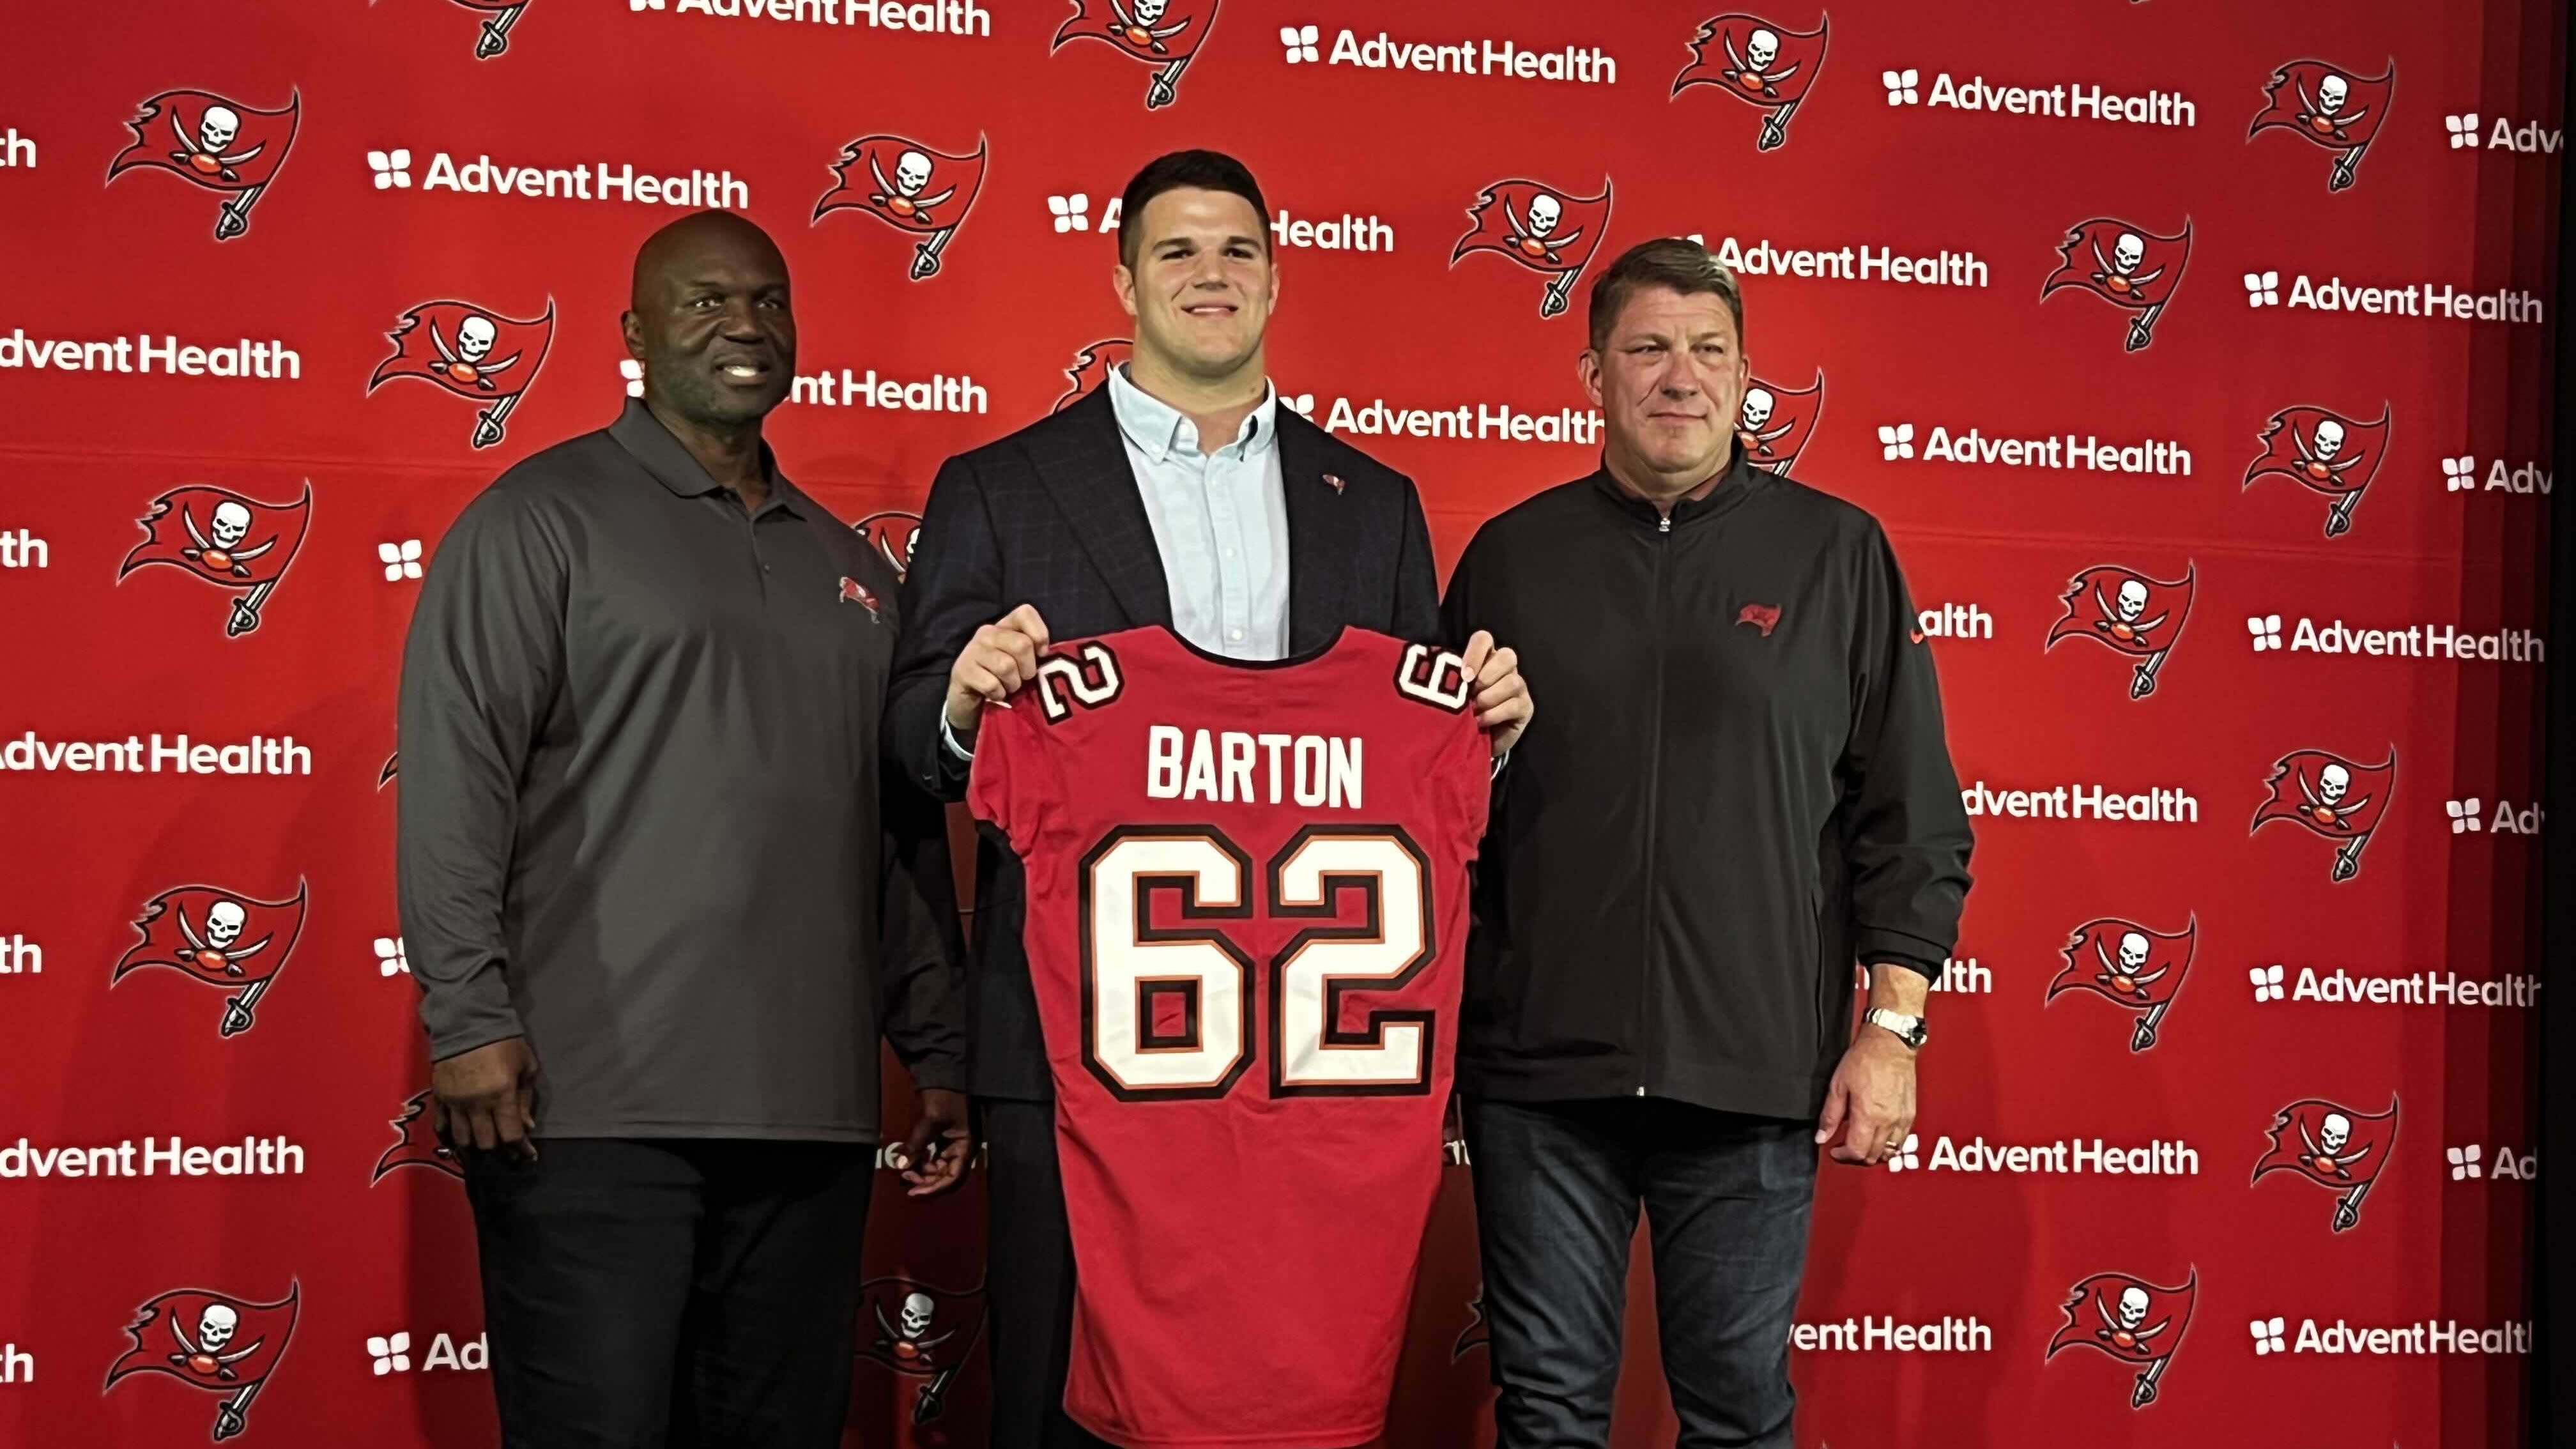 New Buccaneers First Round Draft Pick Graham Barton: 'I'm Ready to Work'